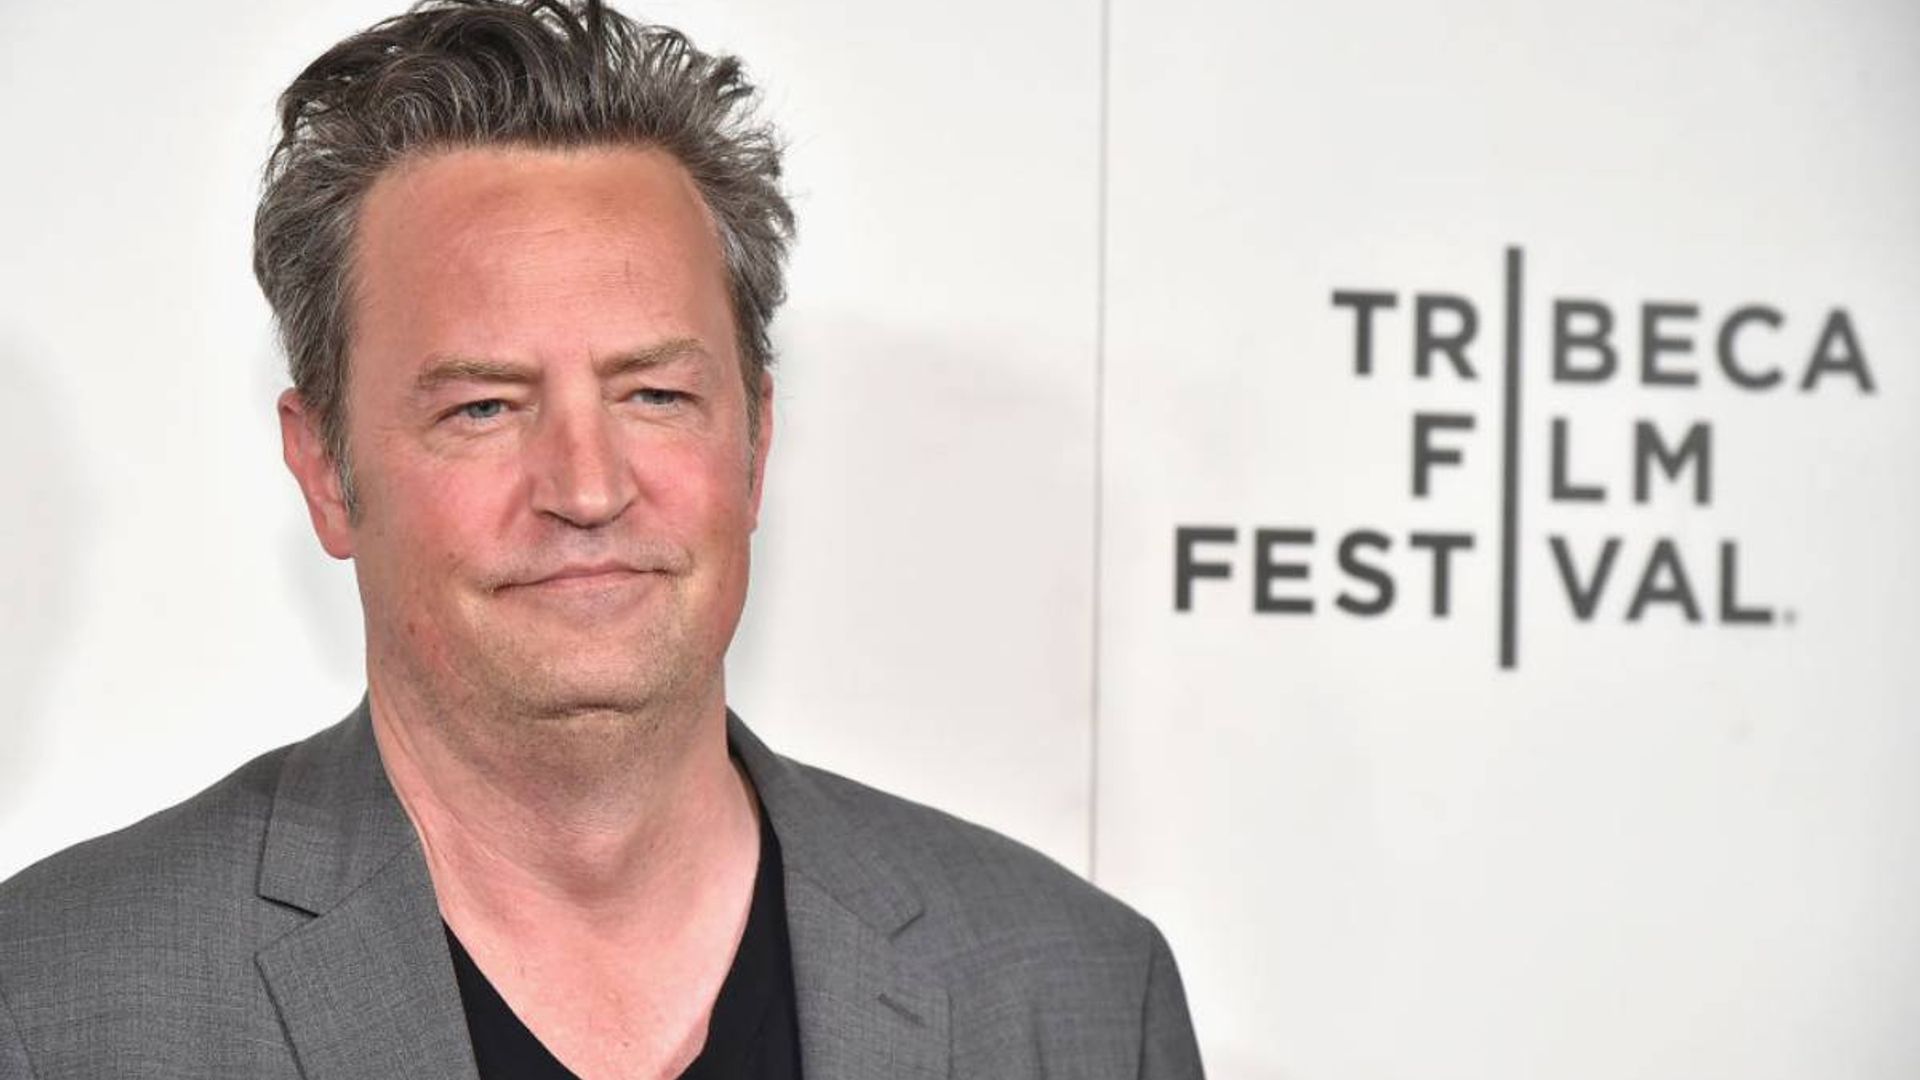 Matthew Perry's appearance causes a stir in photo post-breakup